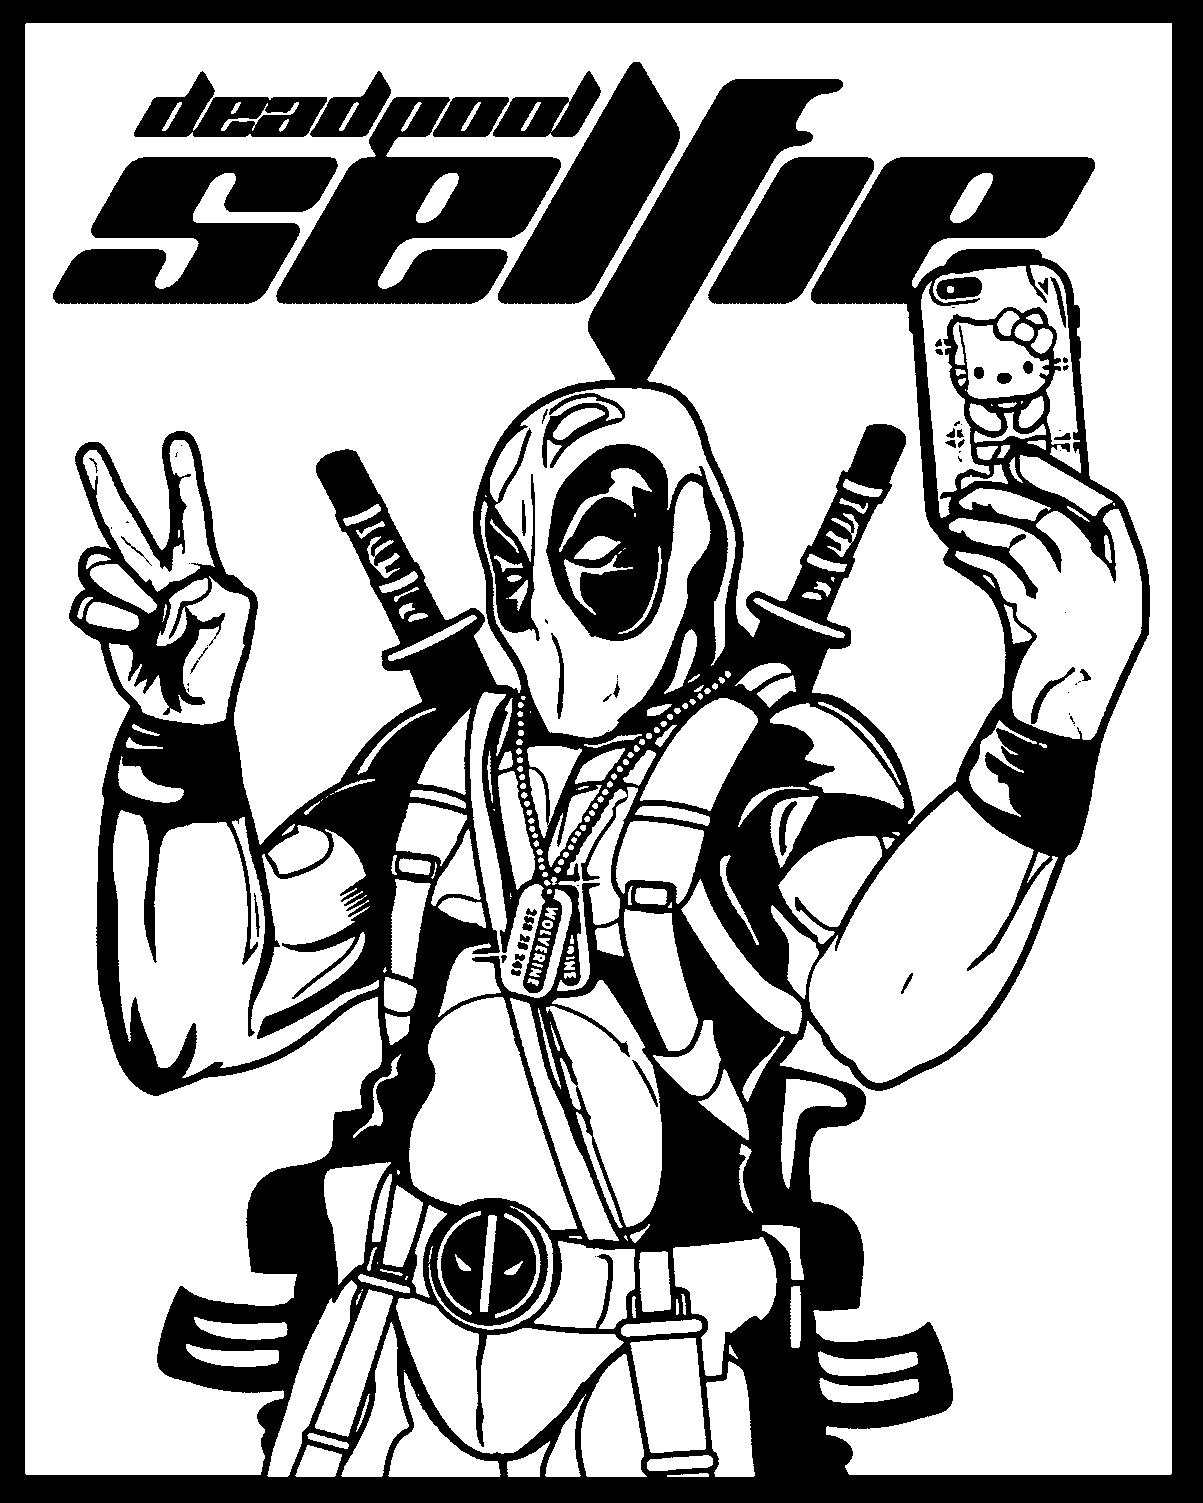 Funny Deadpool Selfie Coloring Page